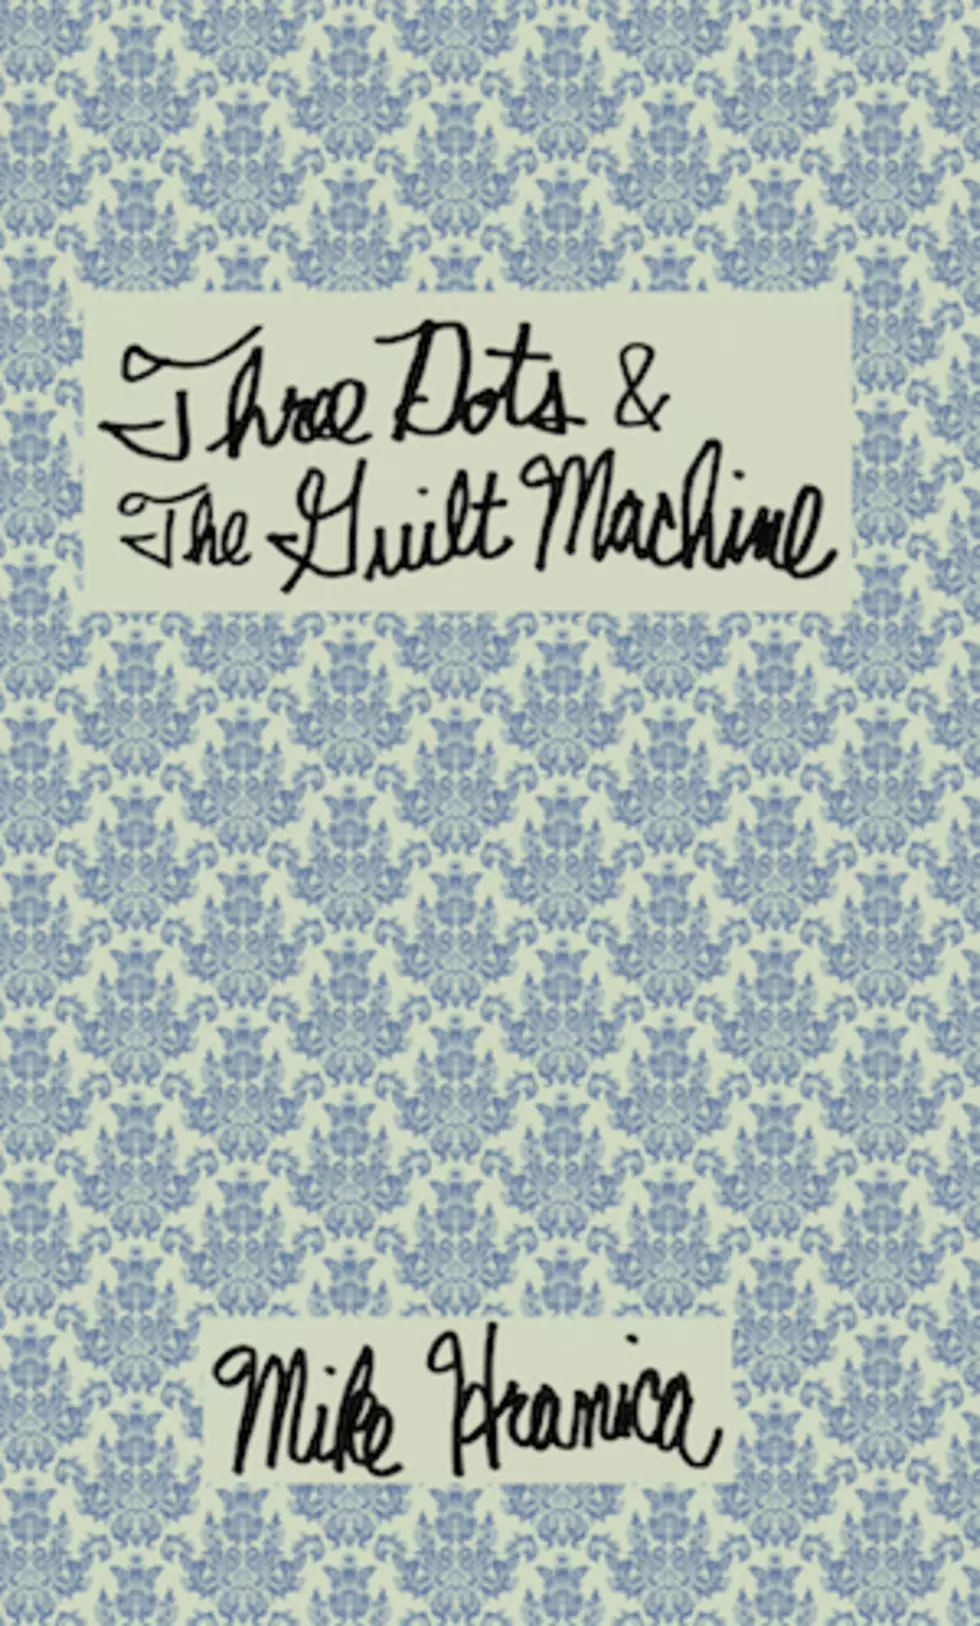 The Devil Wears Prada&#8217;s Mike Hranica Releases Third Book, &#8216;Three Dots &#038; the Guilt Machine&#8217;